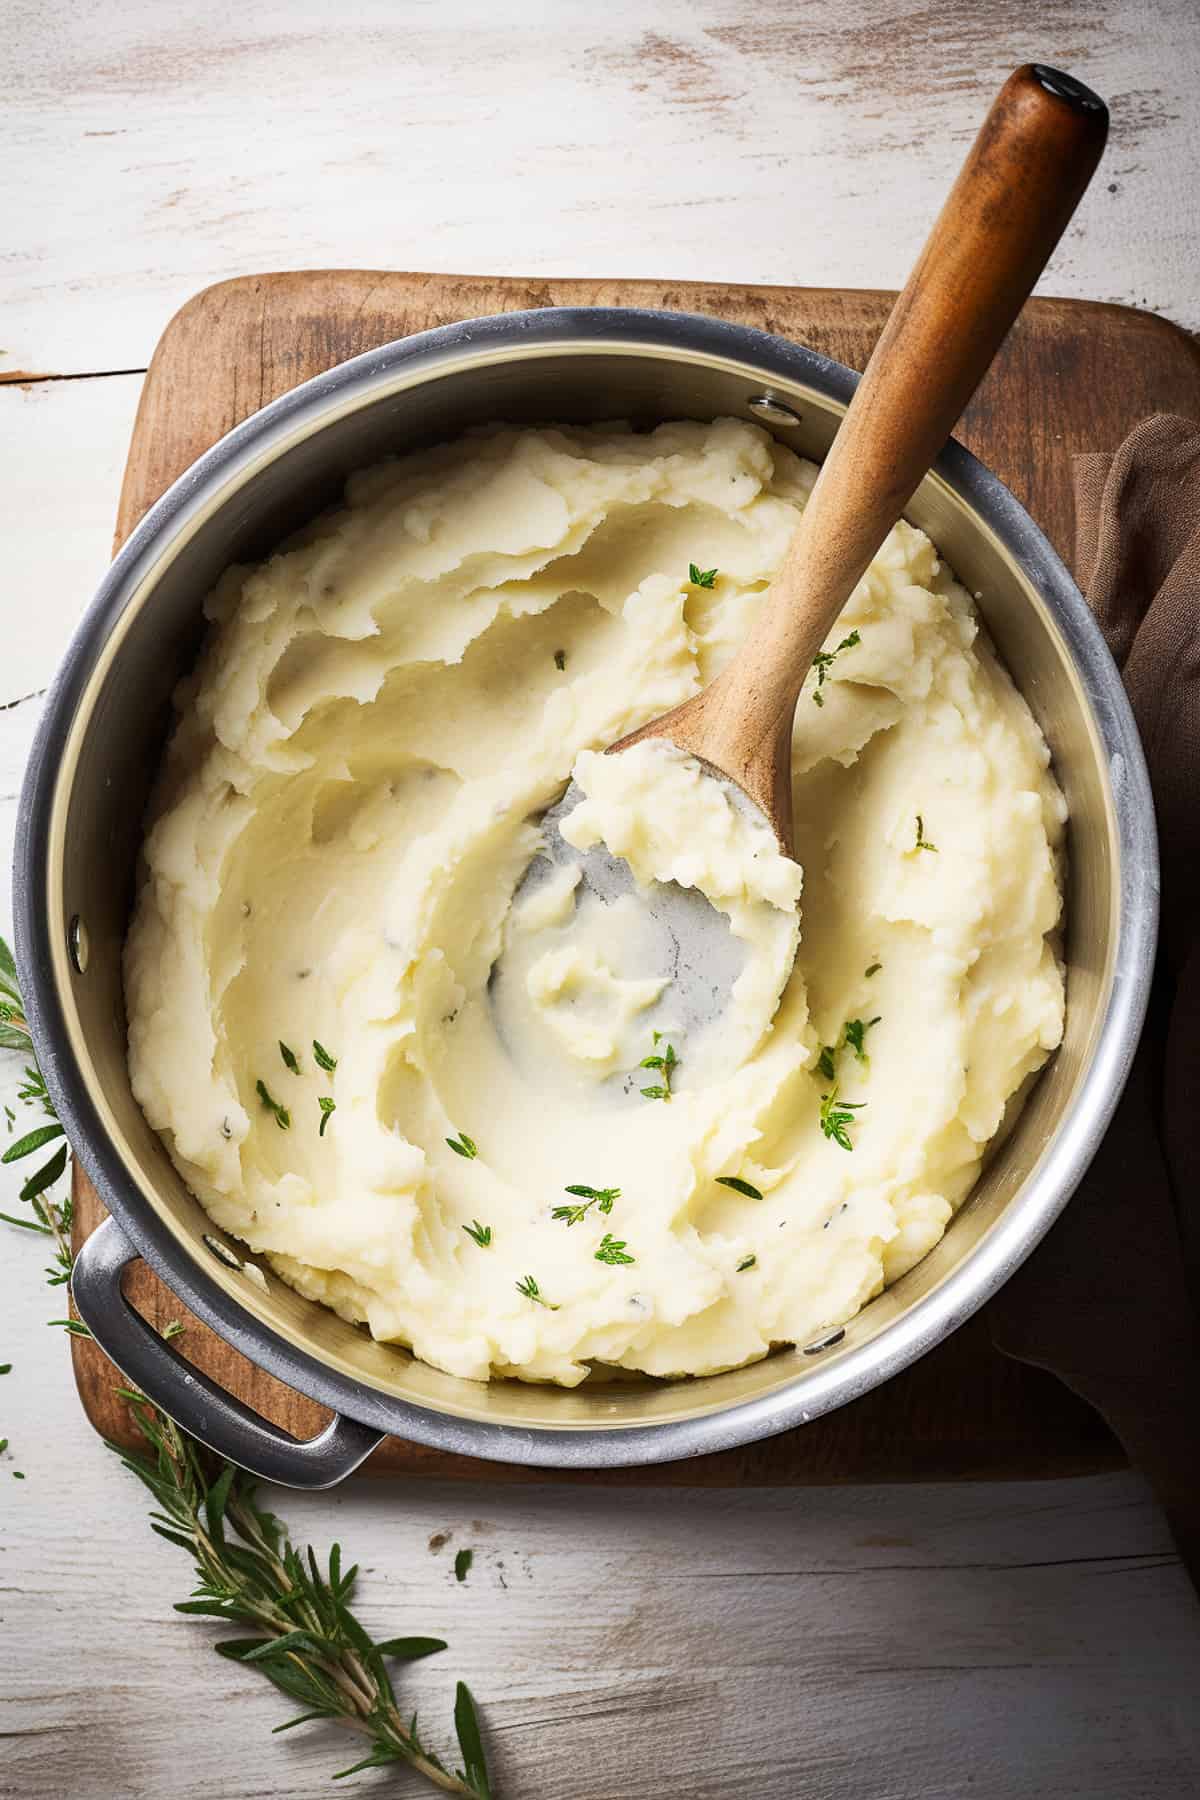 Mashed potatoes for fish pie topping.